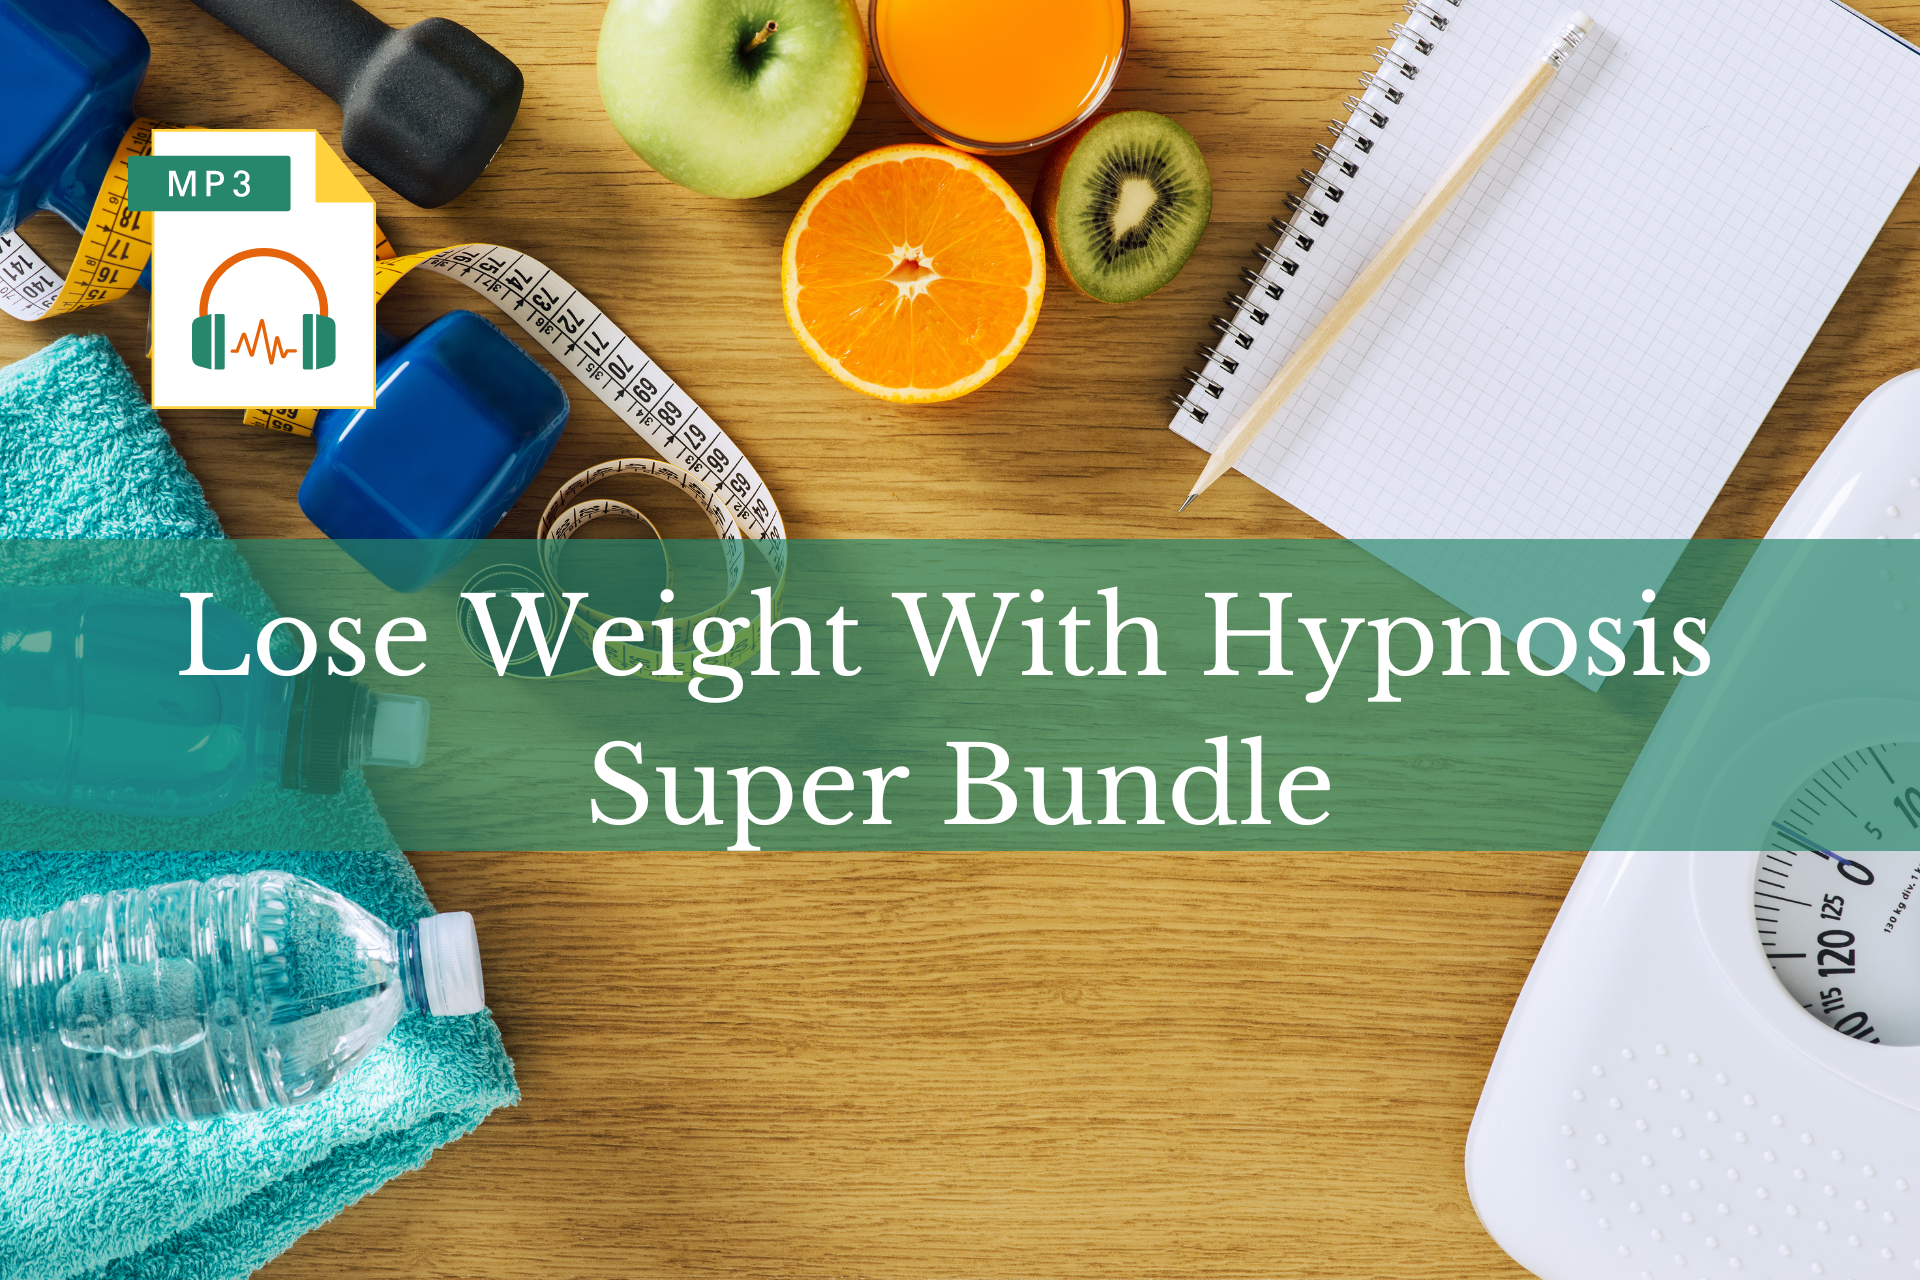 Lose Weight with Hypnosis Bundle